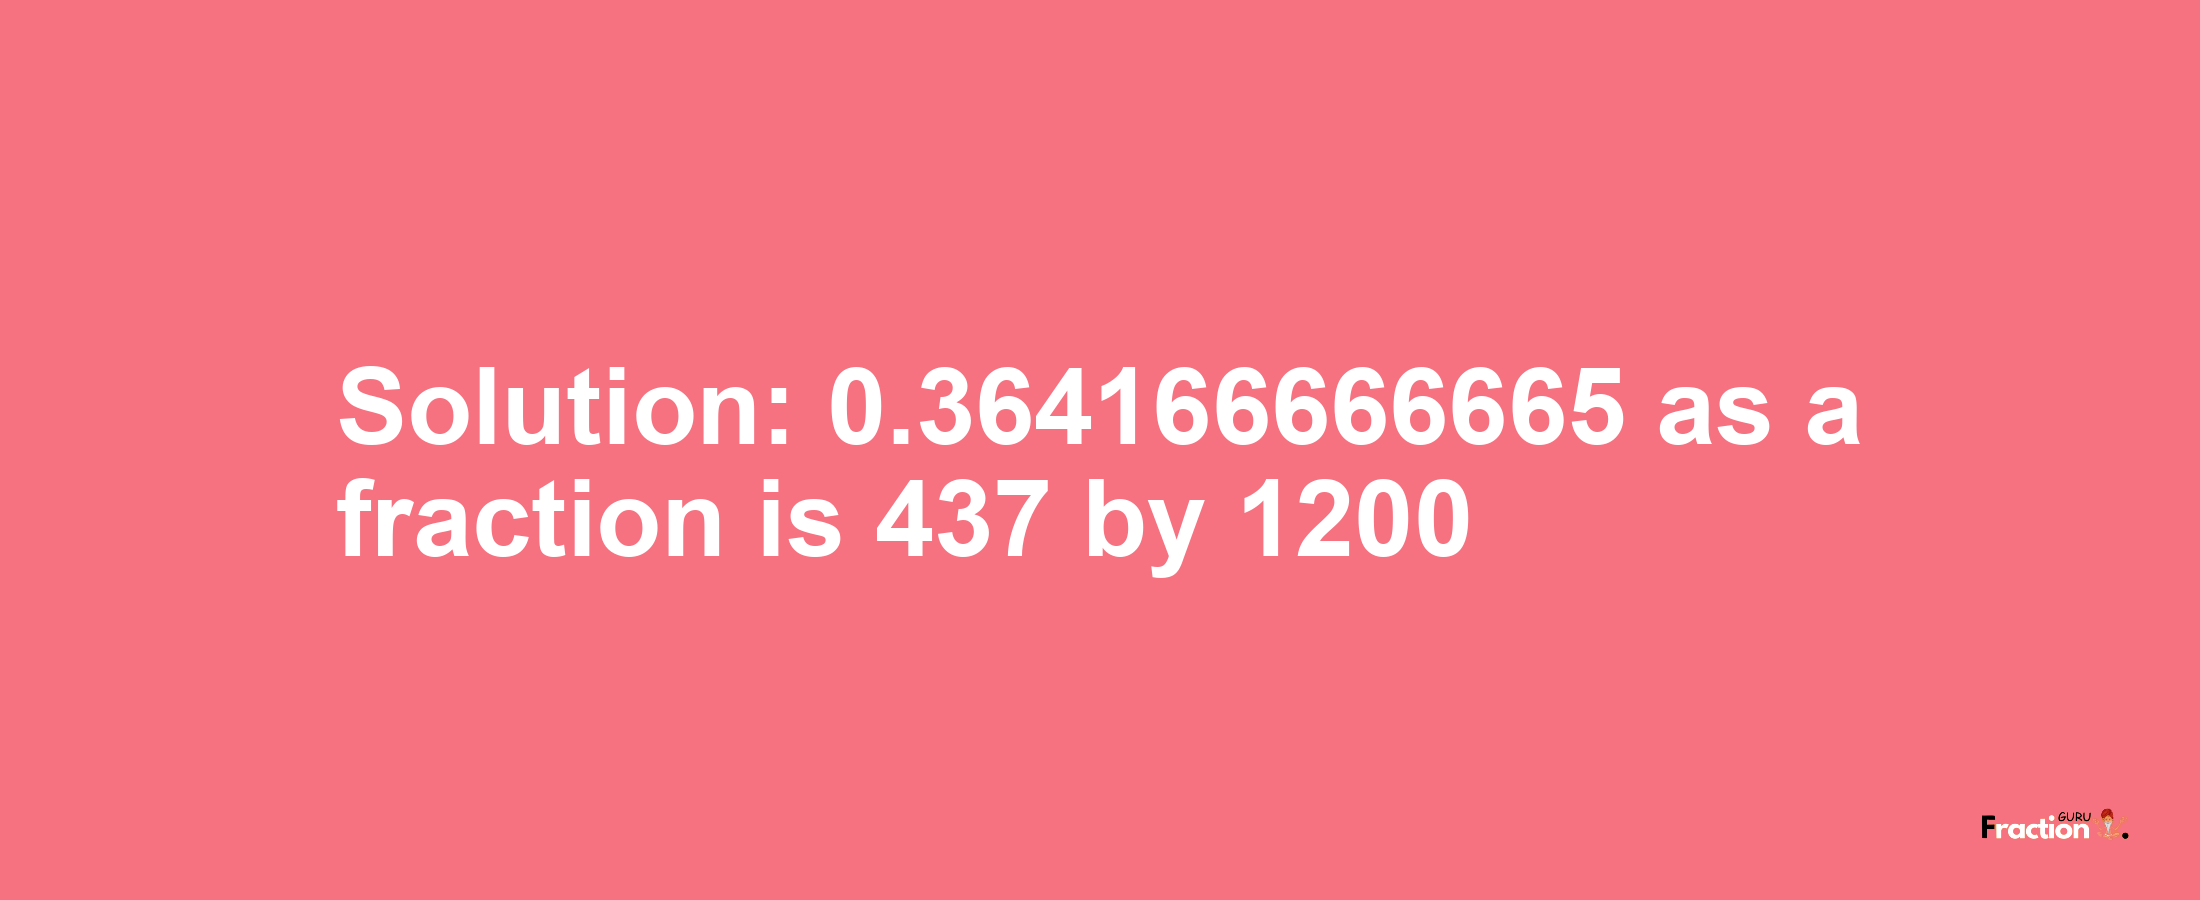 Solution:0.364166666665 as a fraction is 437/1200